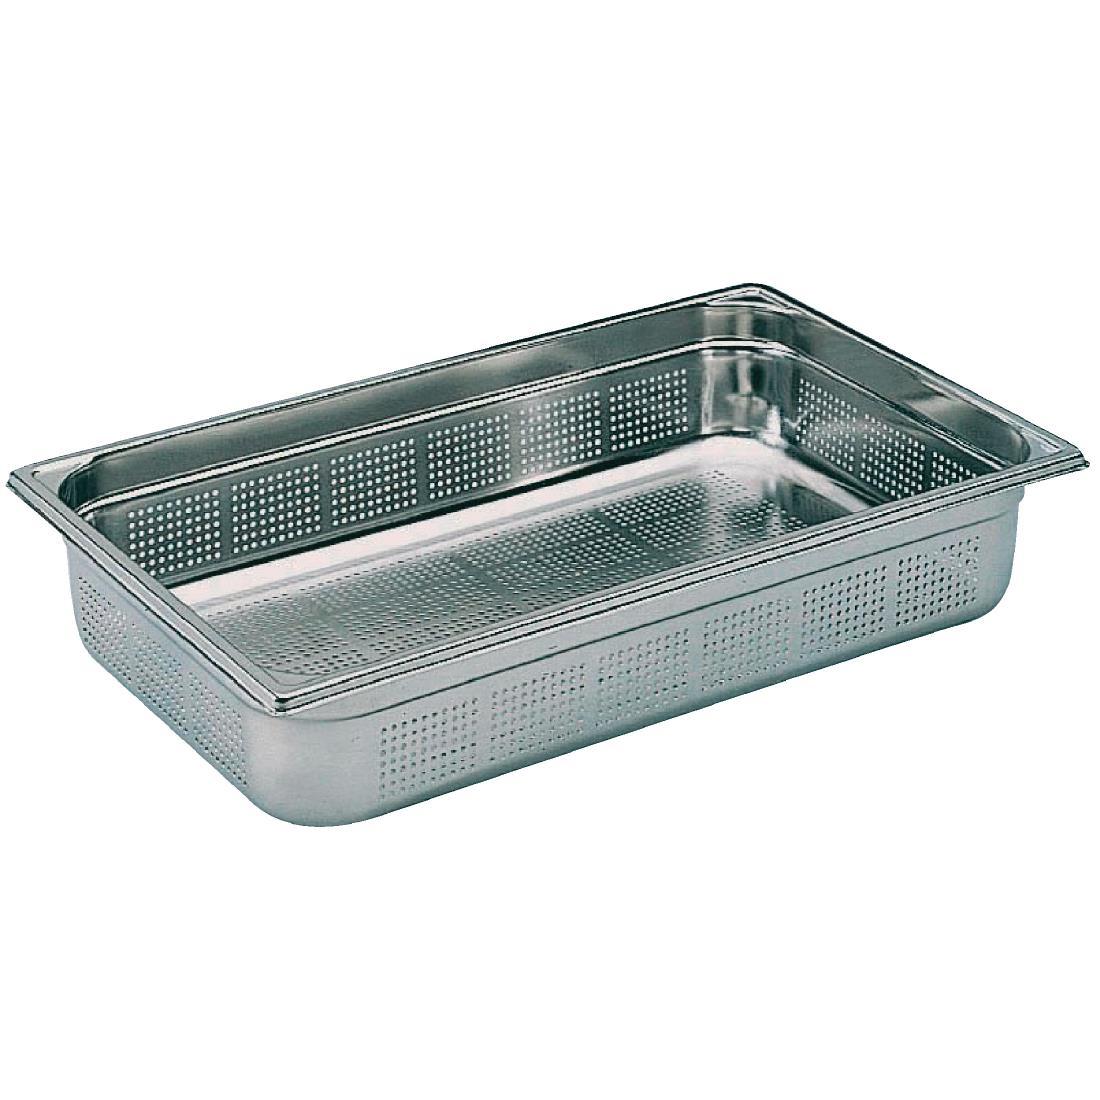 Matfer Bourgeat Stainless Steel Perforated 1/1 Gastronorm Pan 55mm - K140  - 1